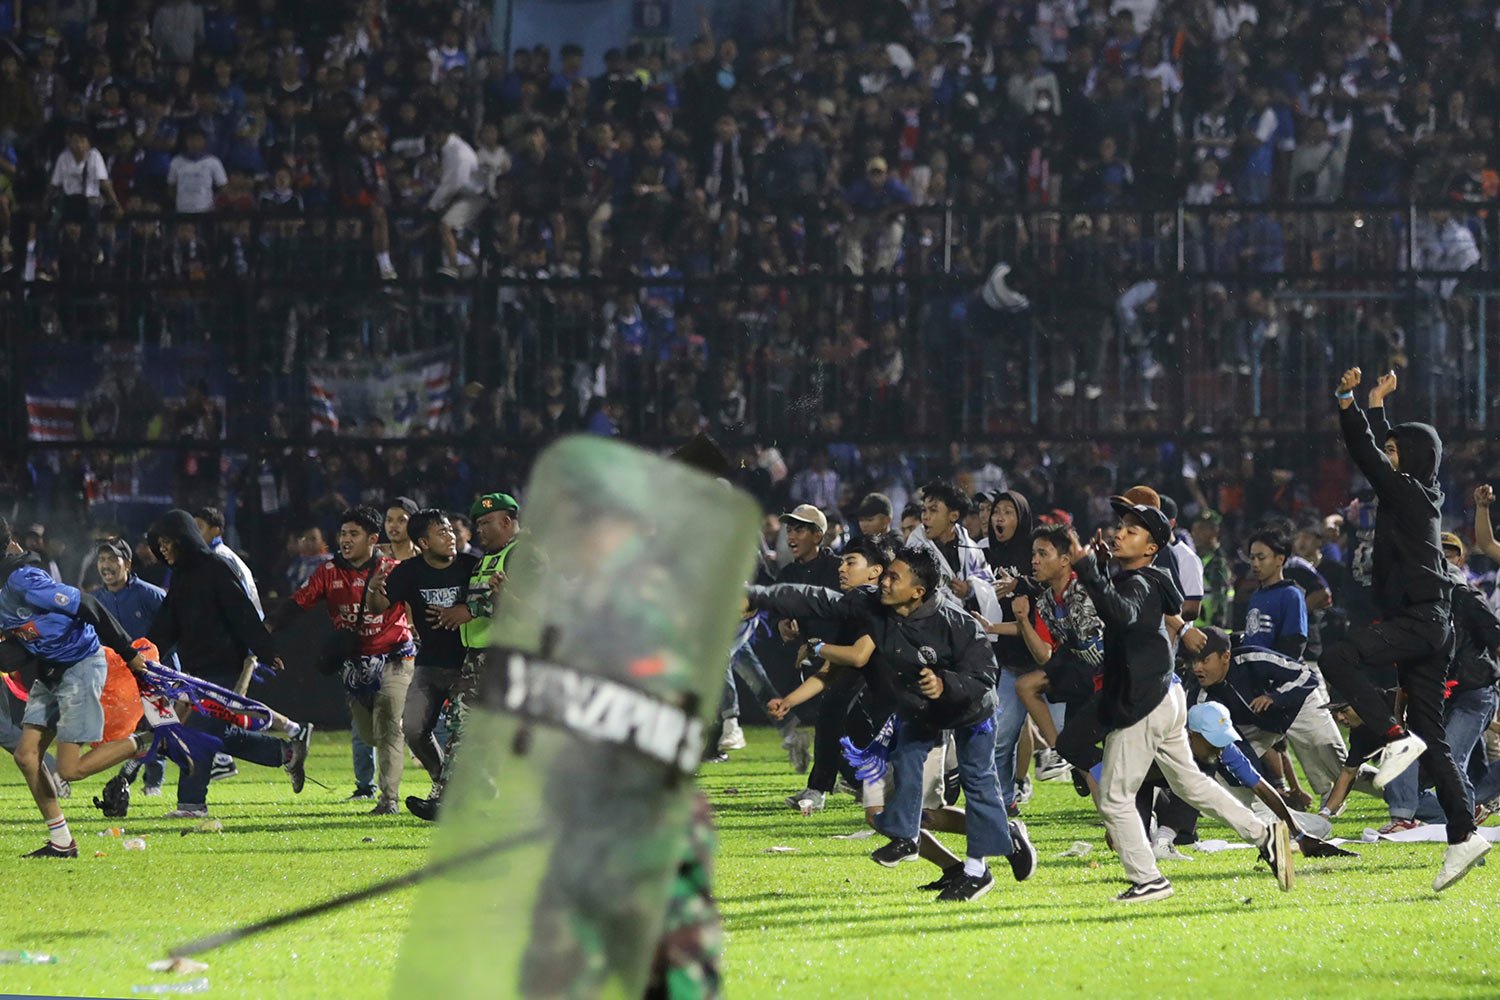  Soccer fans enter the pitch during a clash between supporters at Kanjuruhan Stadium in Malang, East Java, Indonesia, Saturday, Oct. 1, 2022.  (AP Photo/Yudha Prabowo) 